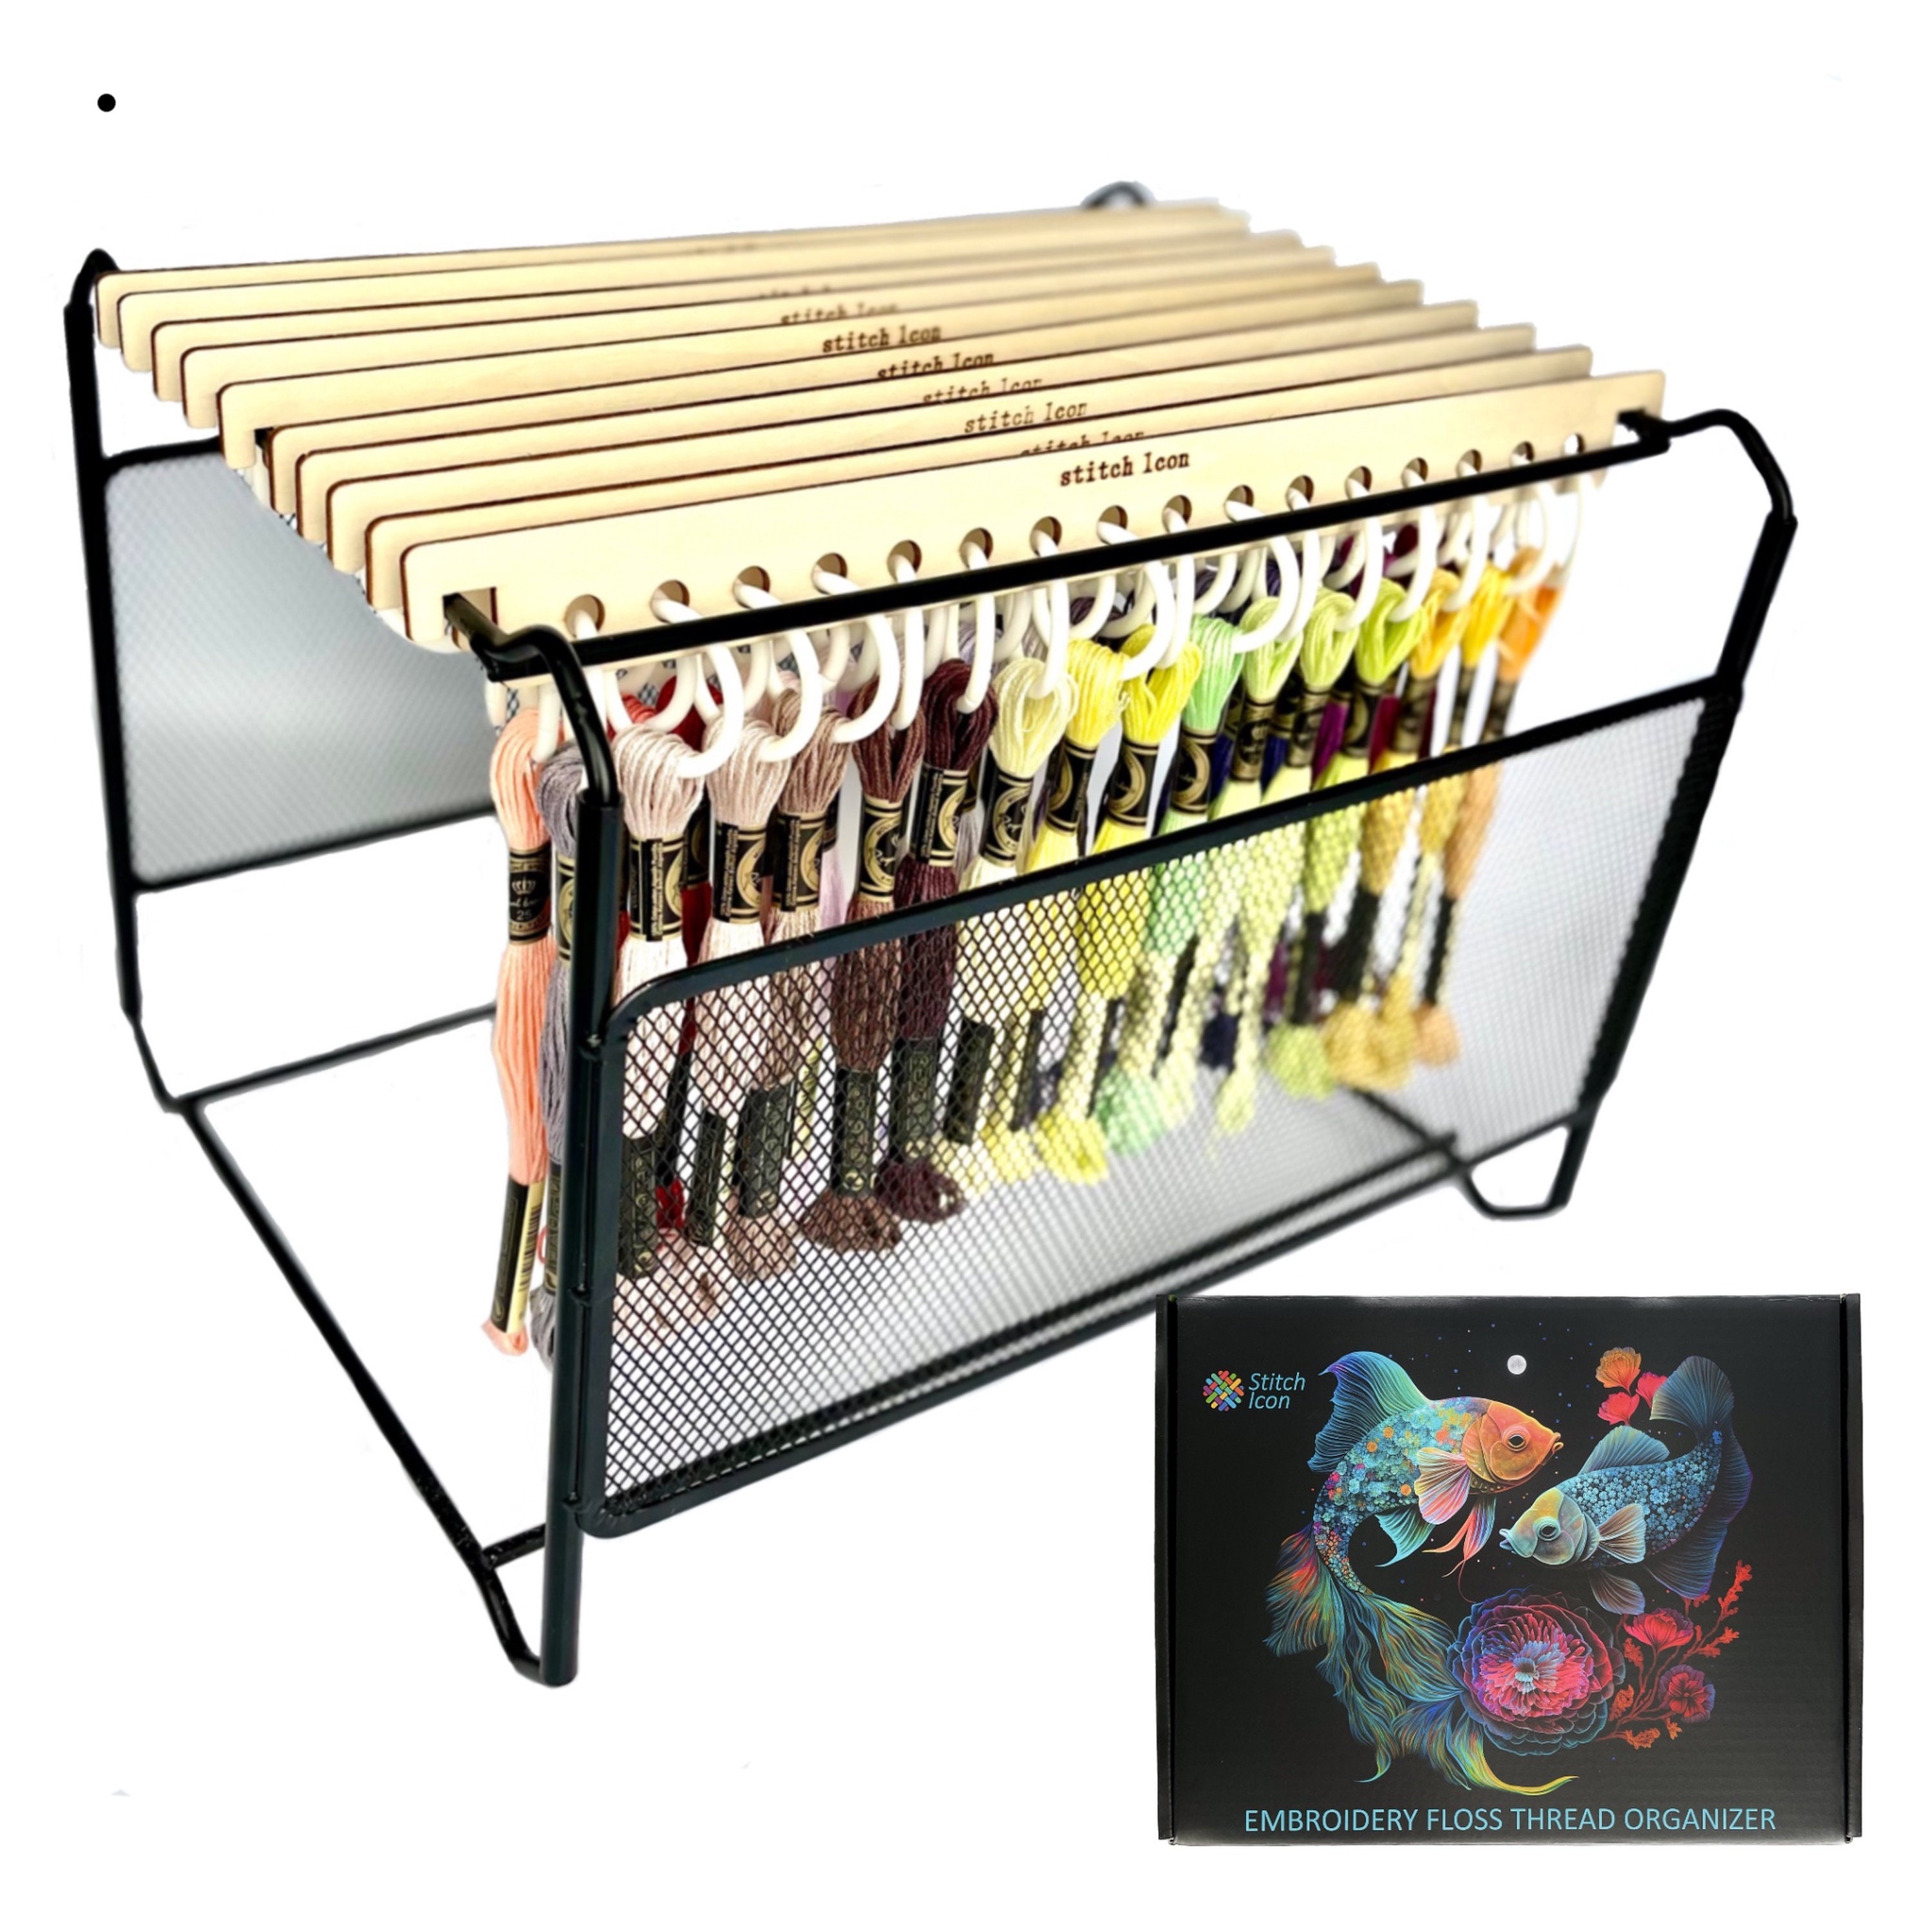 DMC Stitch Bow Floss Organizer System Storage Case 24 Embroidery Floss  Included